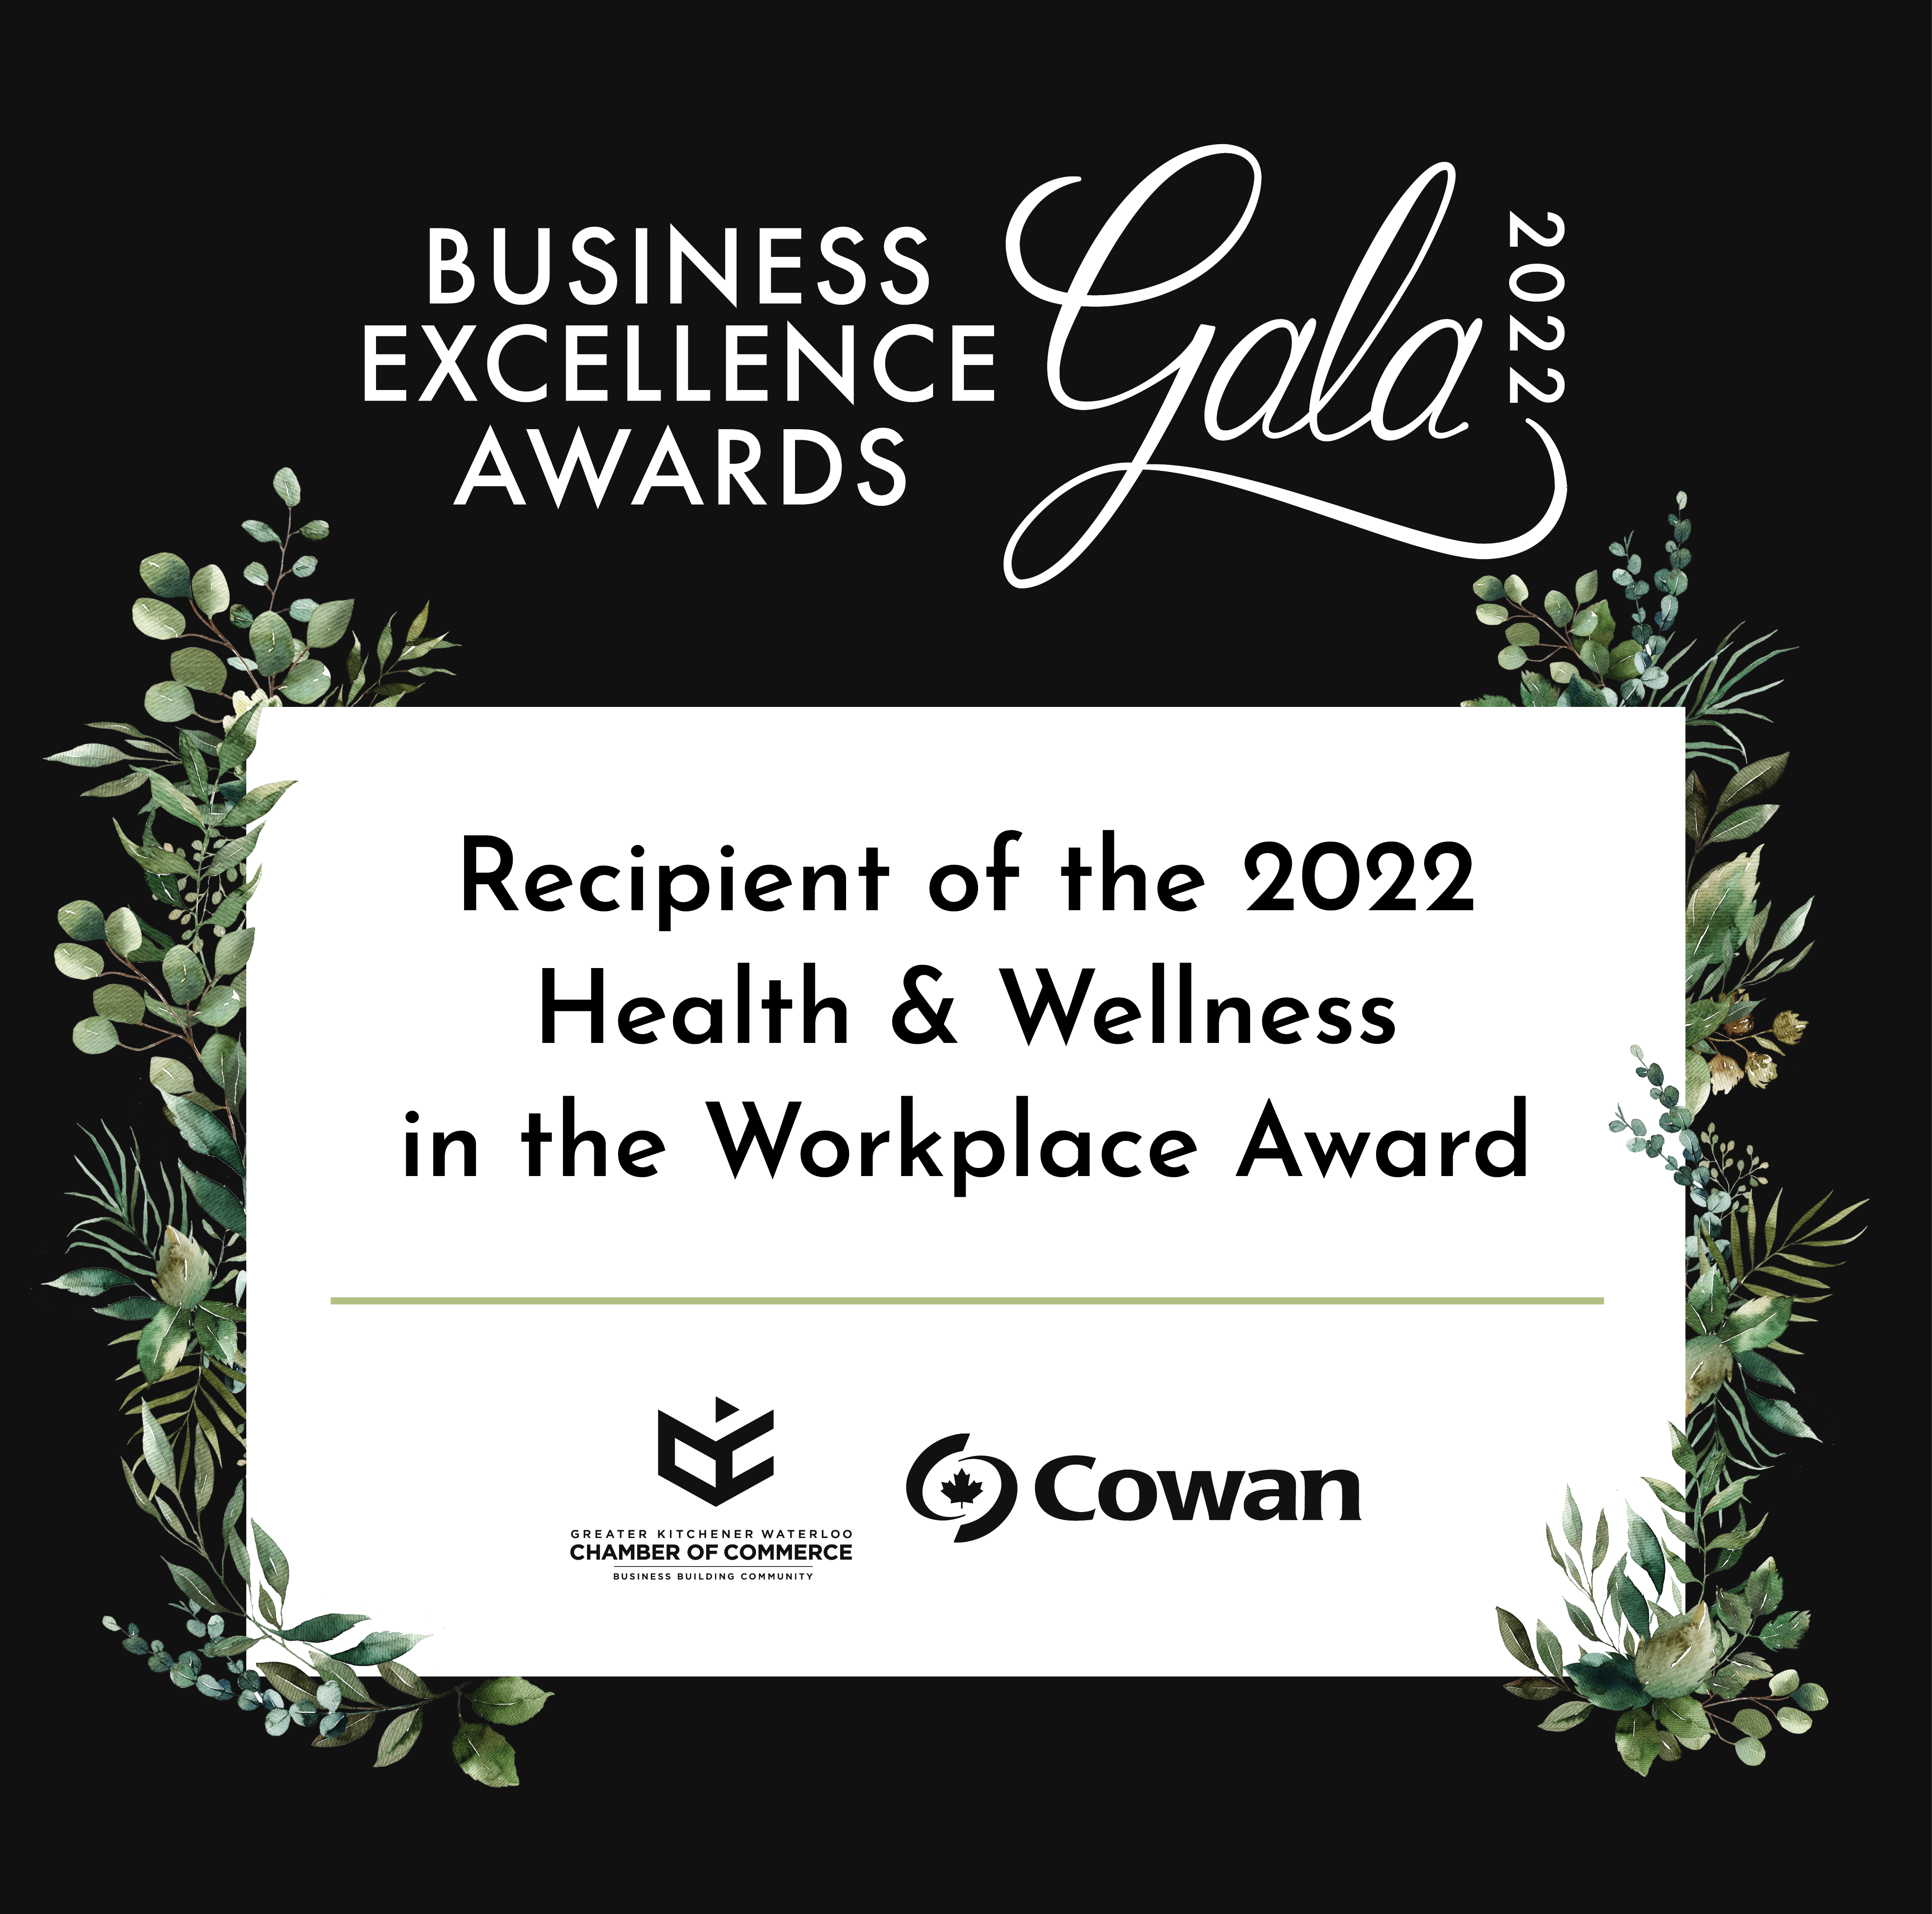 KEI receives the Health & Wellness in the Workplace Award at the 2022 Business Excellence Awards Gala!